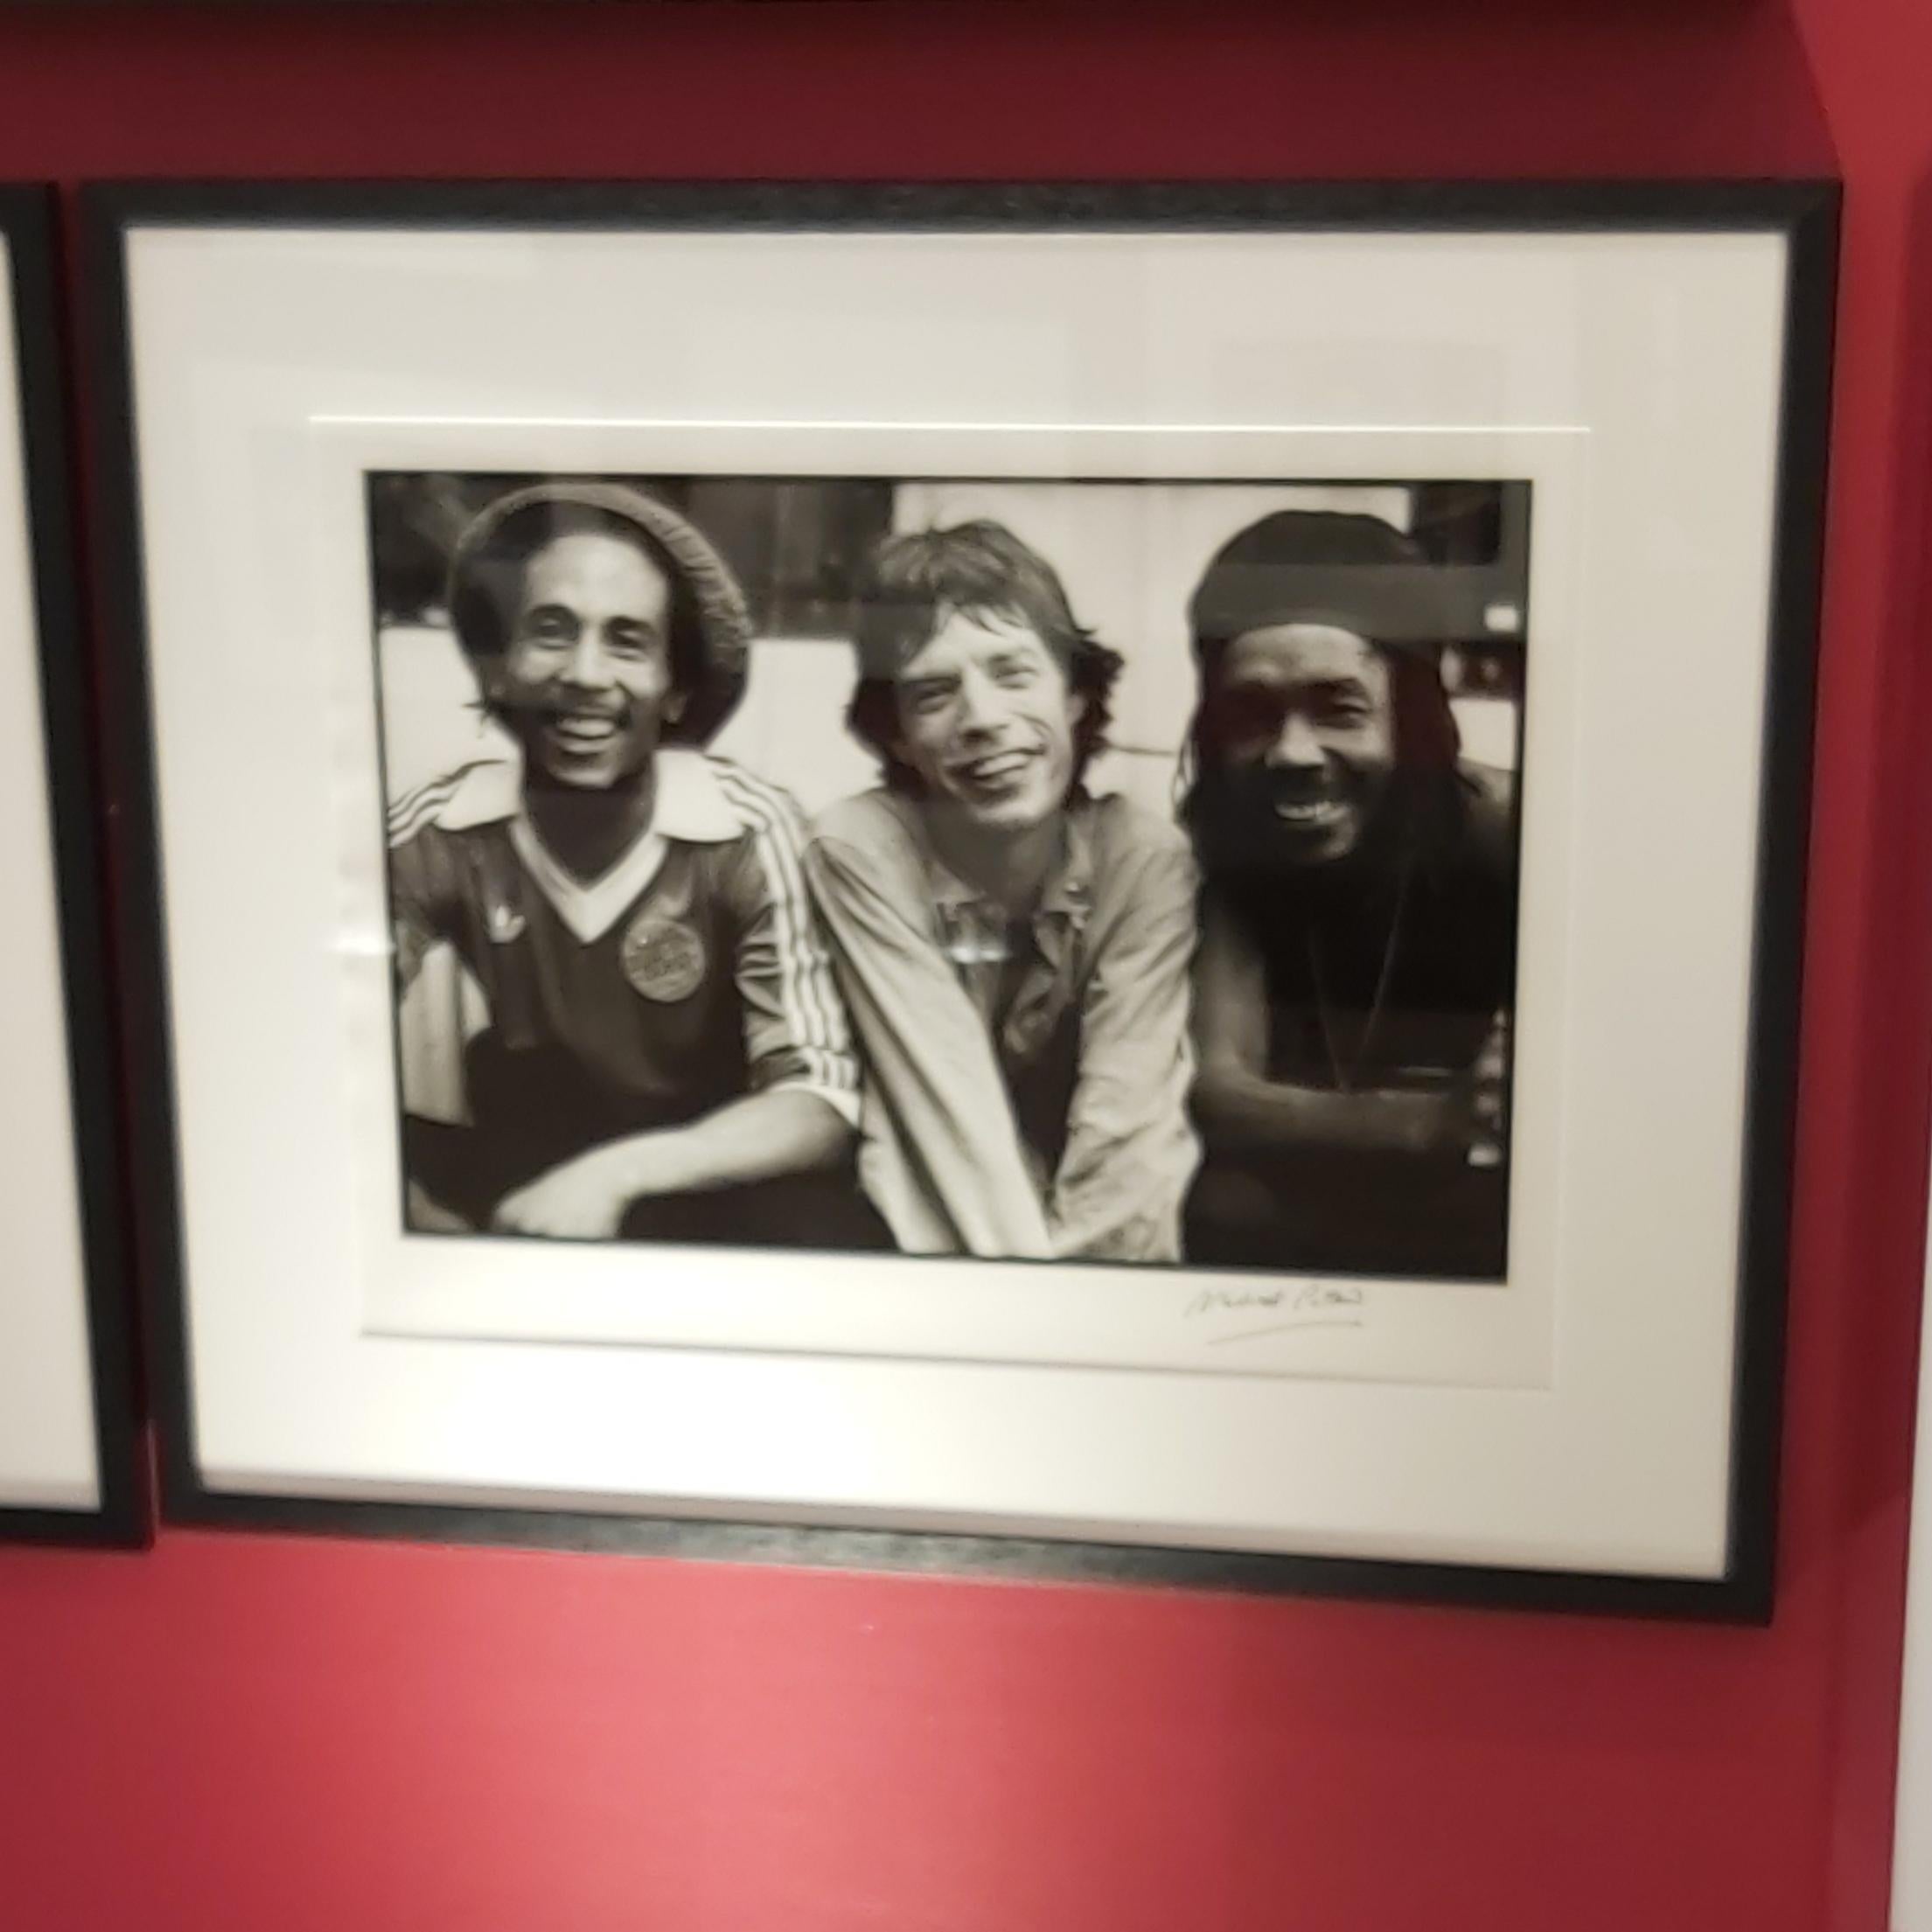 Bob, Mick and Pete, by Michael Putland, 1978. Signed Edition.

Bob Marley, Mick Jagger and Peter Tosh backstage after the Rolling Stones concert at the Palladium Theatre, New York, 1978.

Silver Gelatin Fibre darkroom print.
Framed in b lack solid